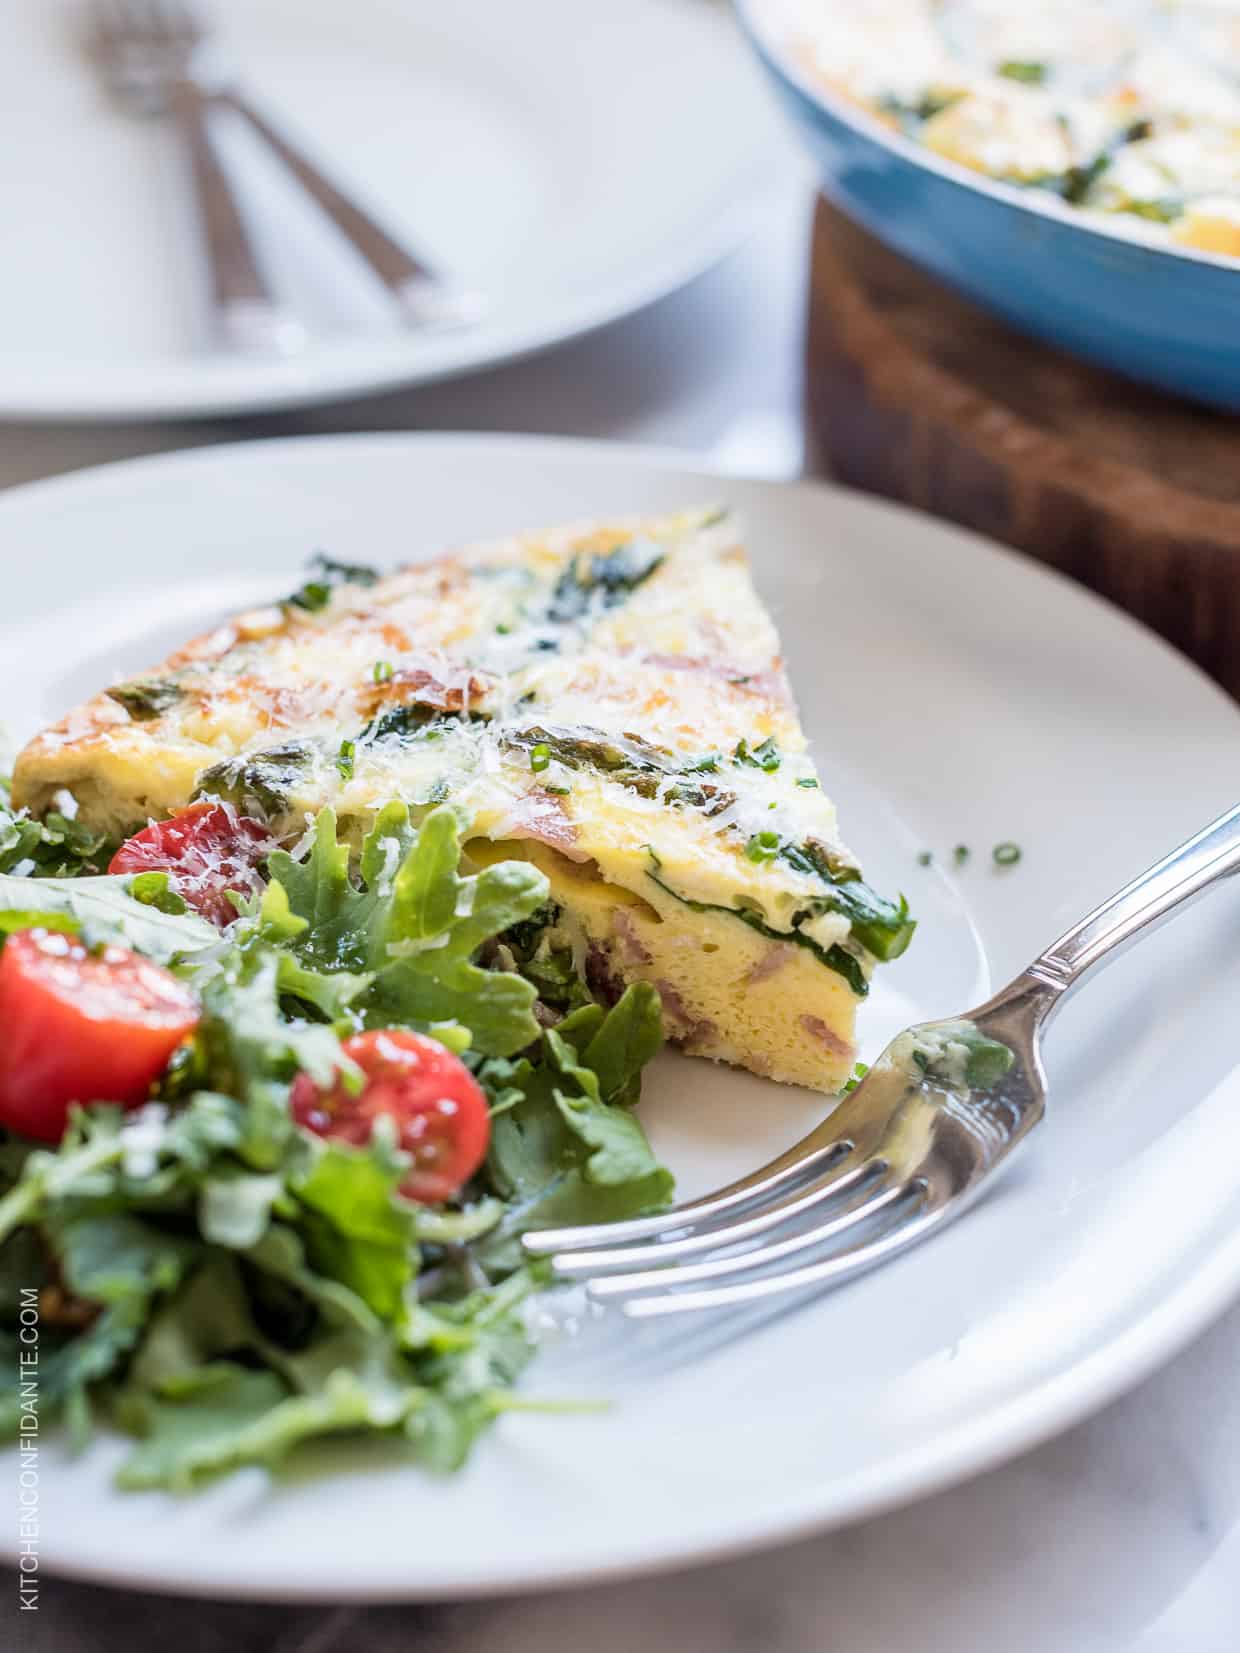 A wedge of Asparagus, Ham and Kale Frittata served on a white plate alongside a green salad.